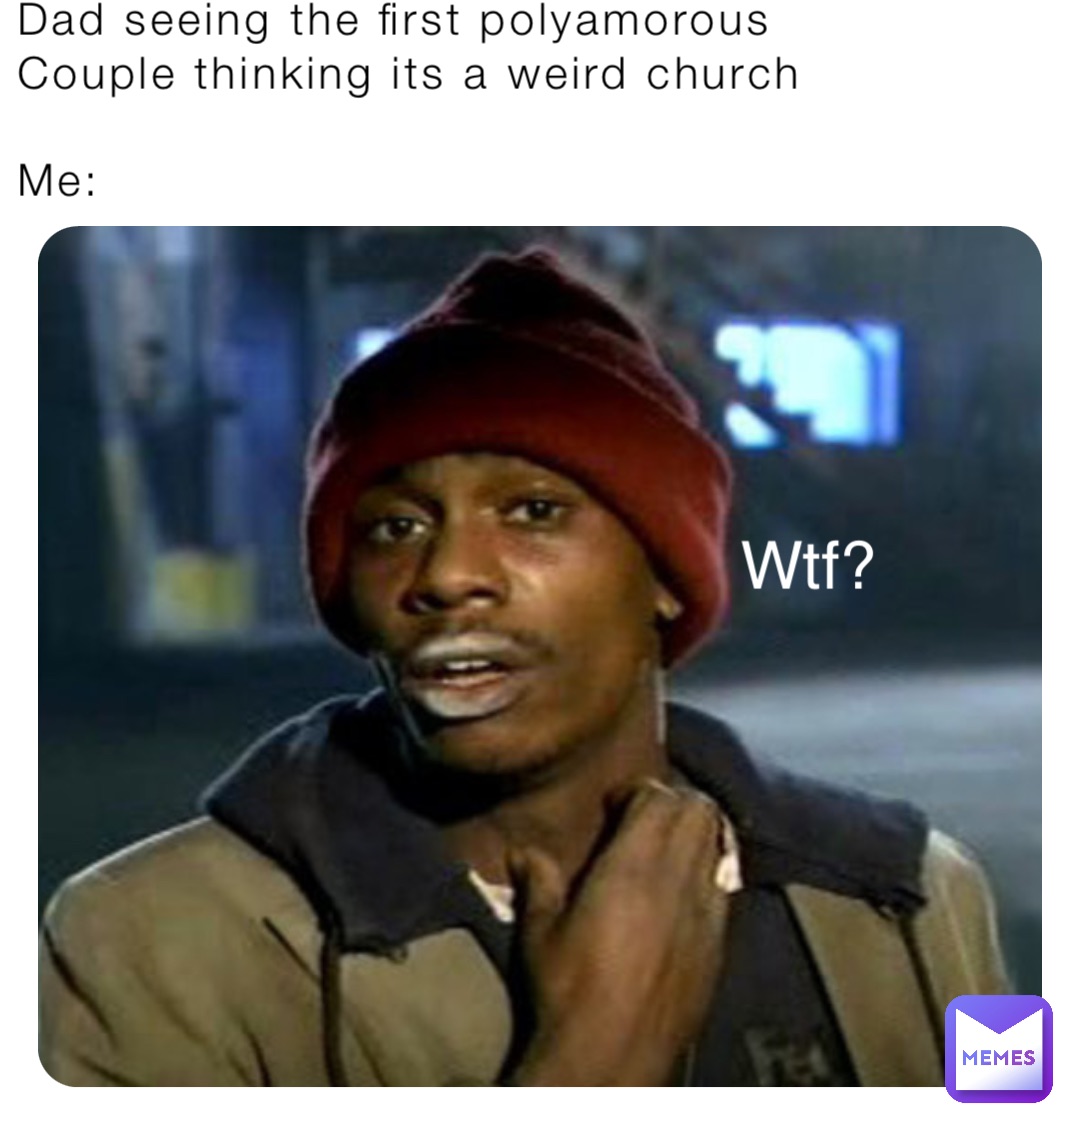 Dad seeing the first polyamorous 
Couple thinking its a weird church

Me: Wtf?